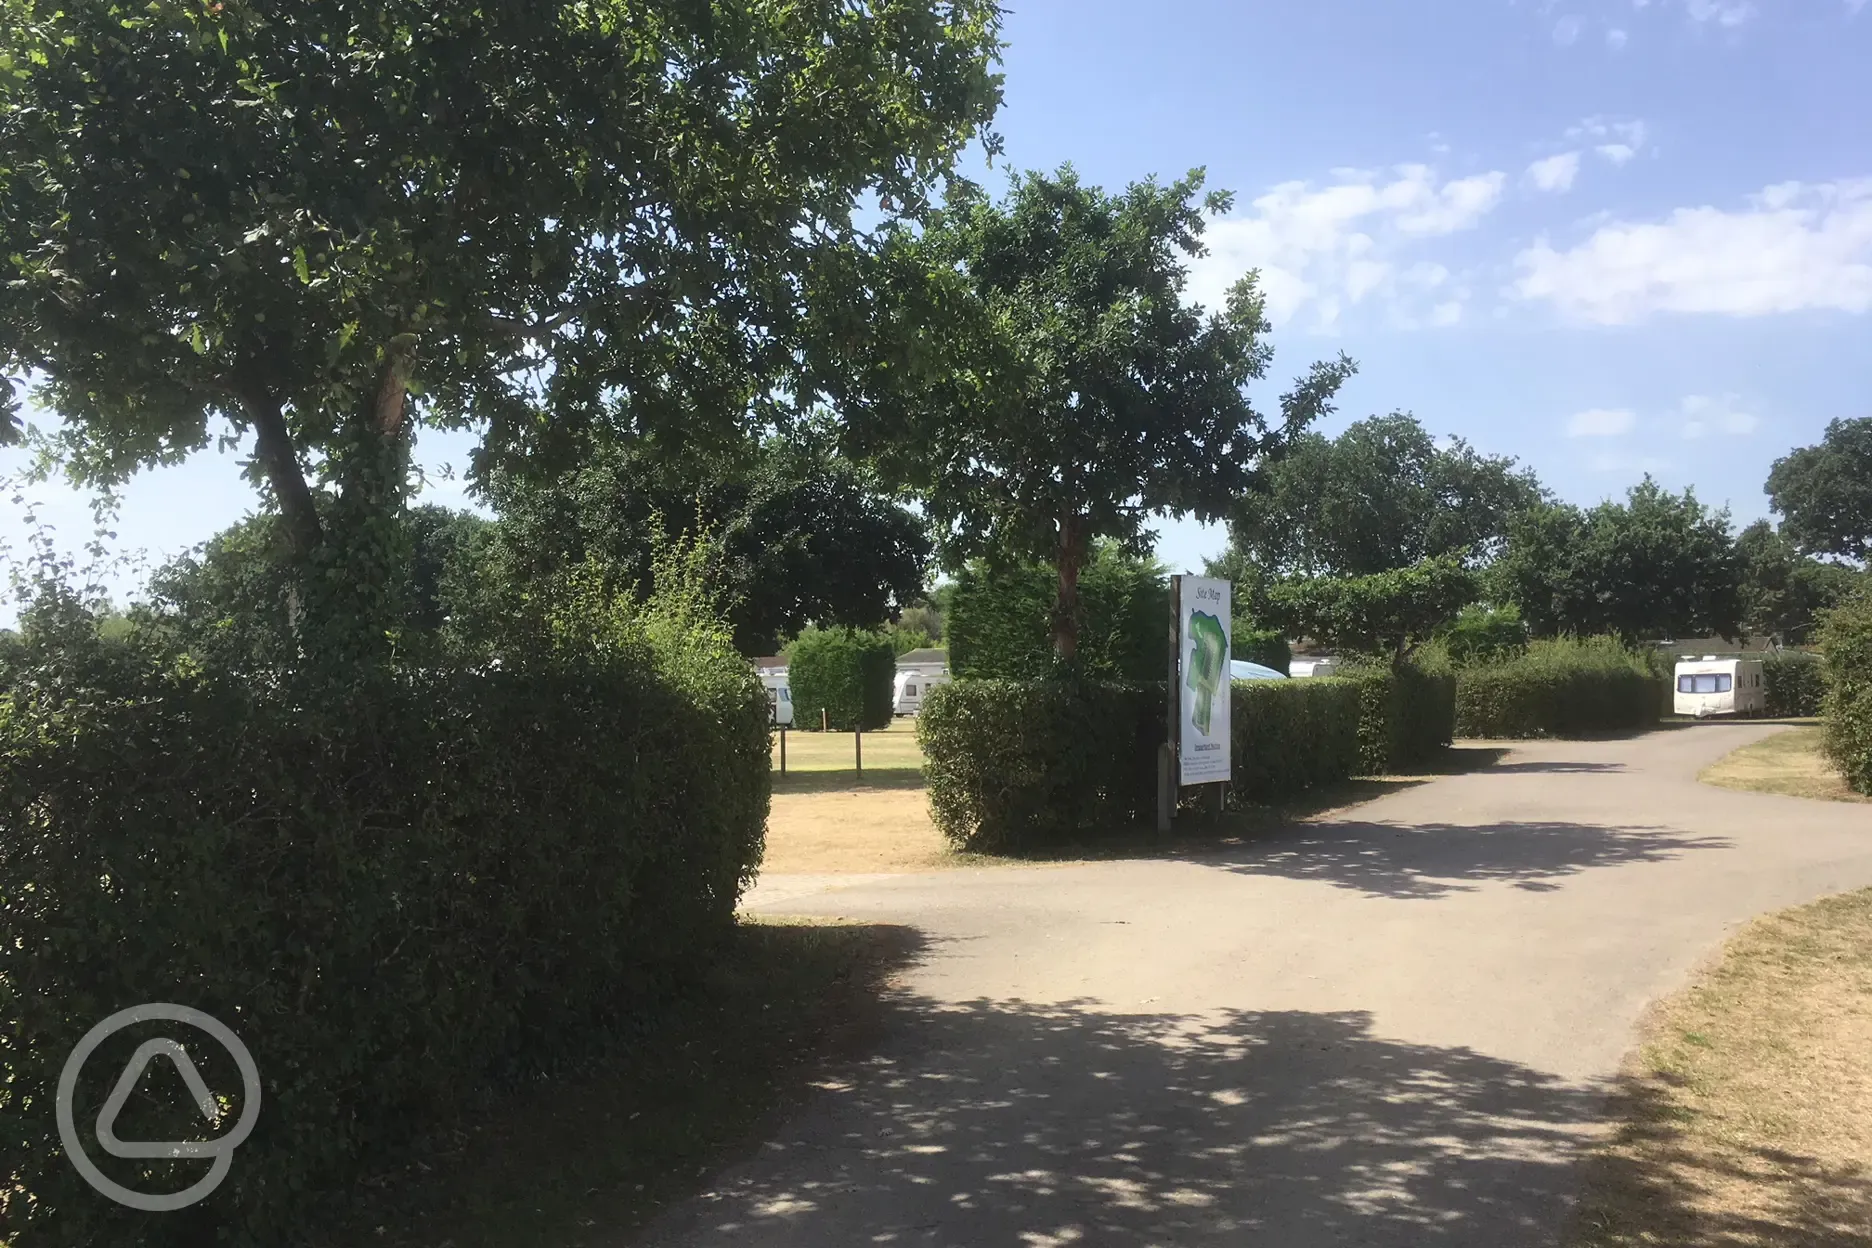 Entrance to main camping field